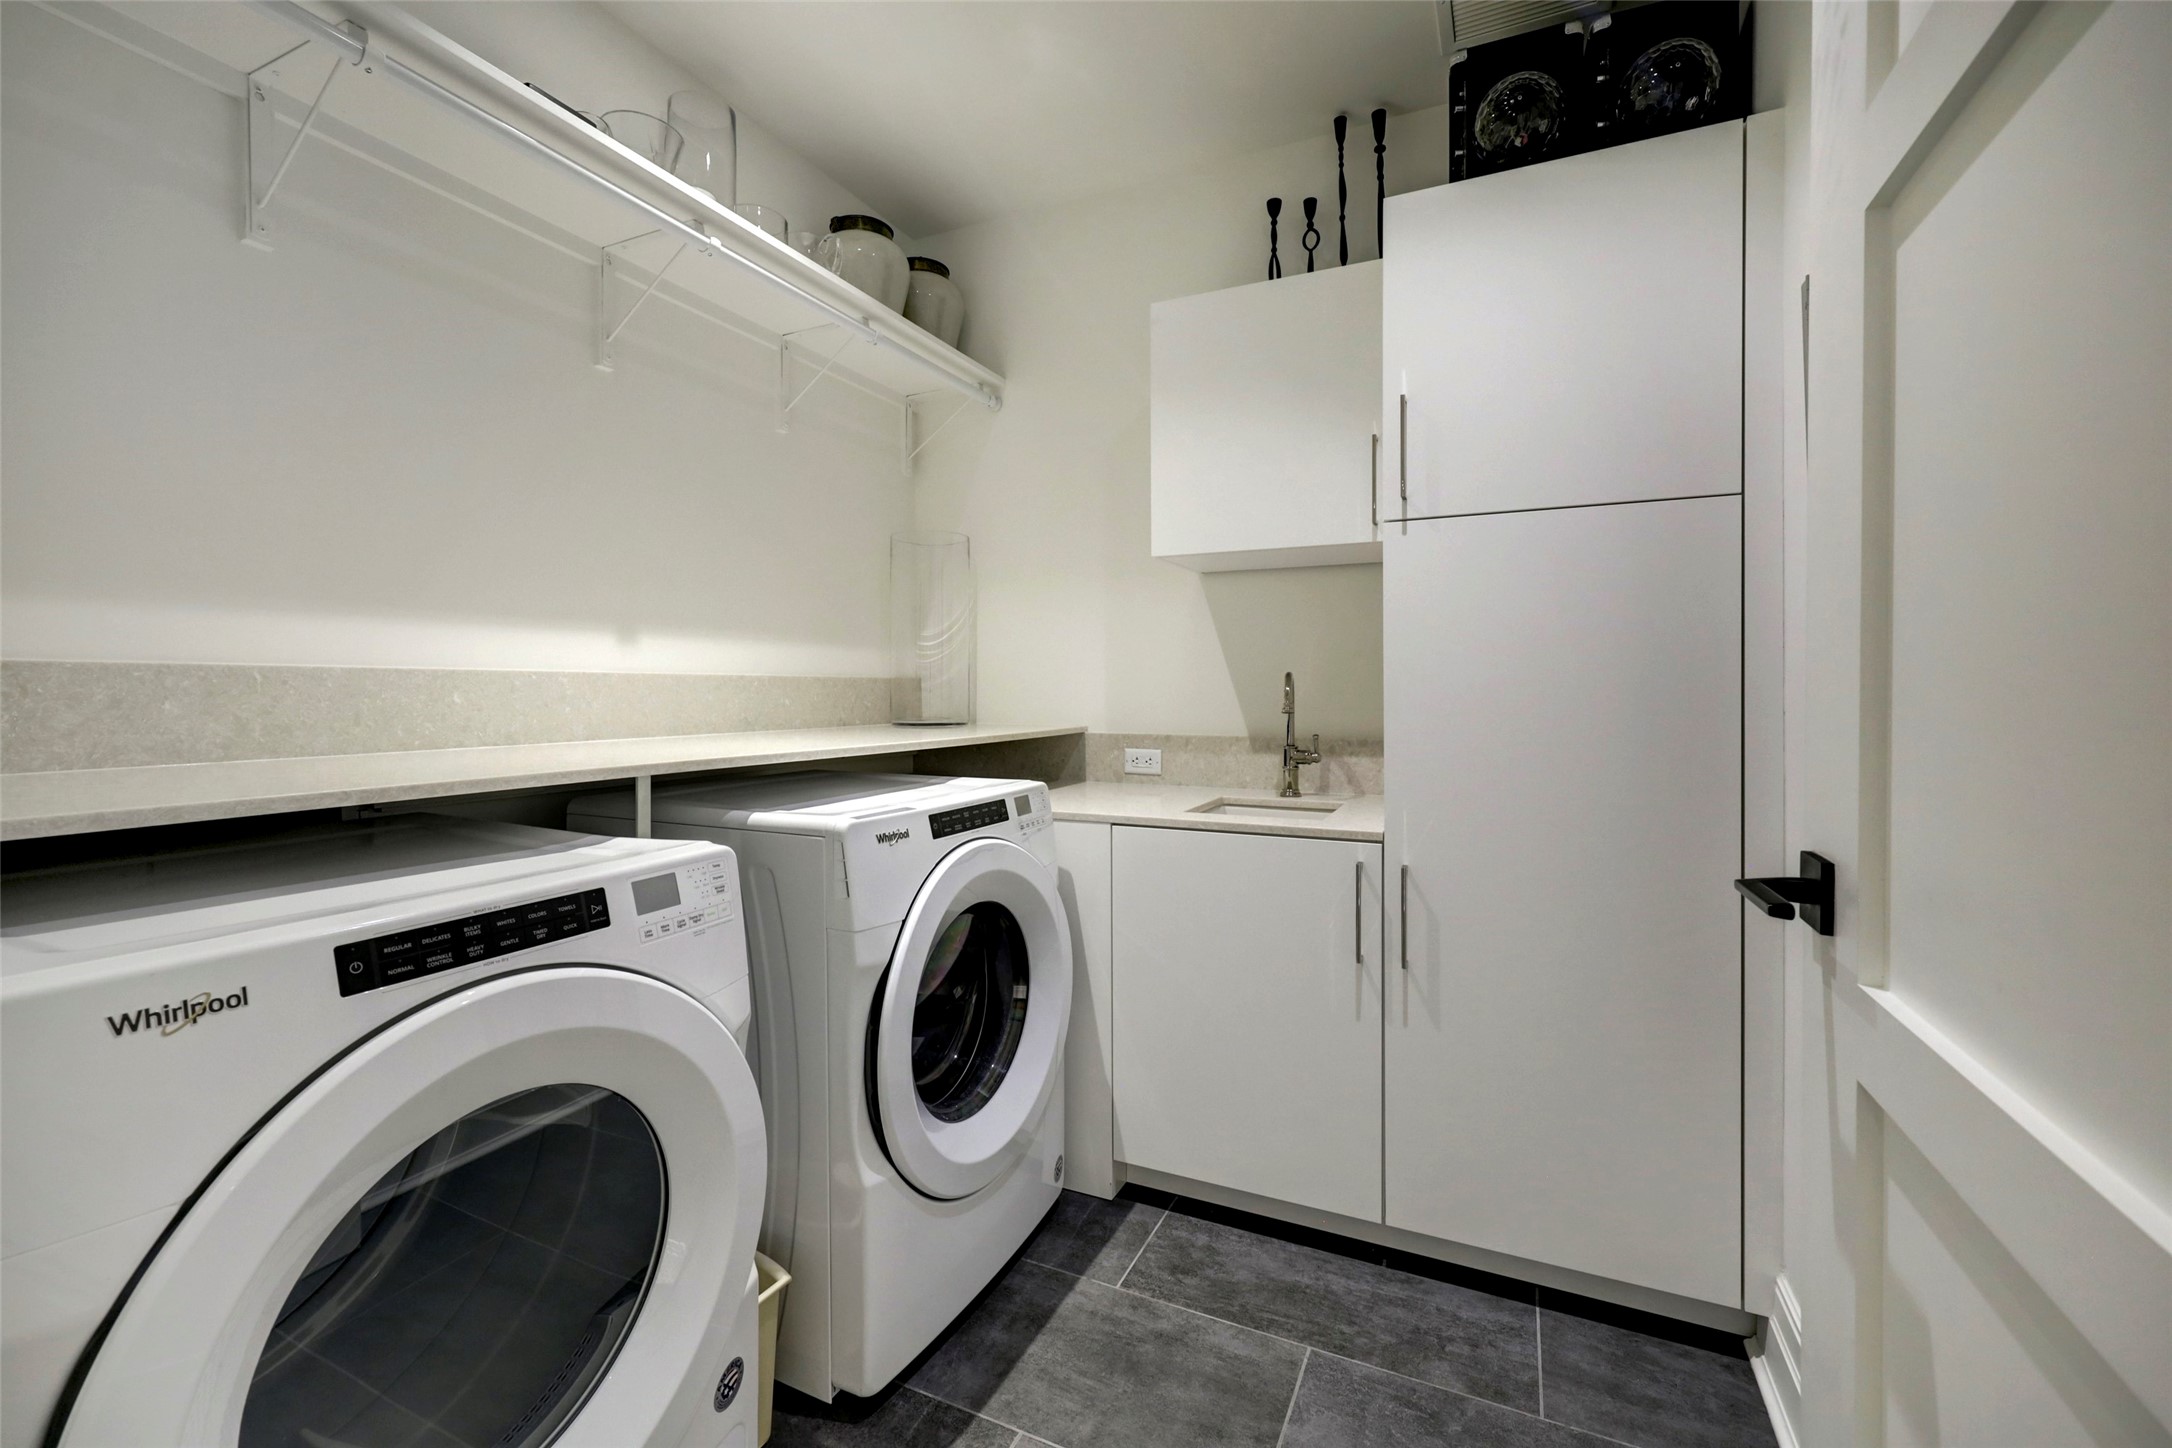 The very well-stocked Utility Room has tile floors, a sink and extra storage.